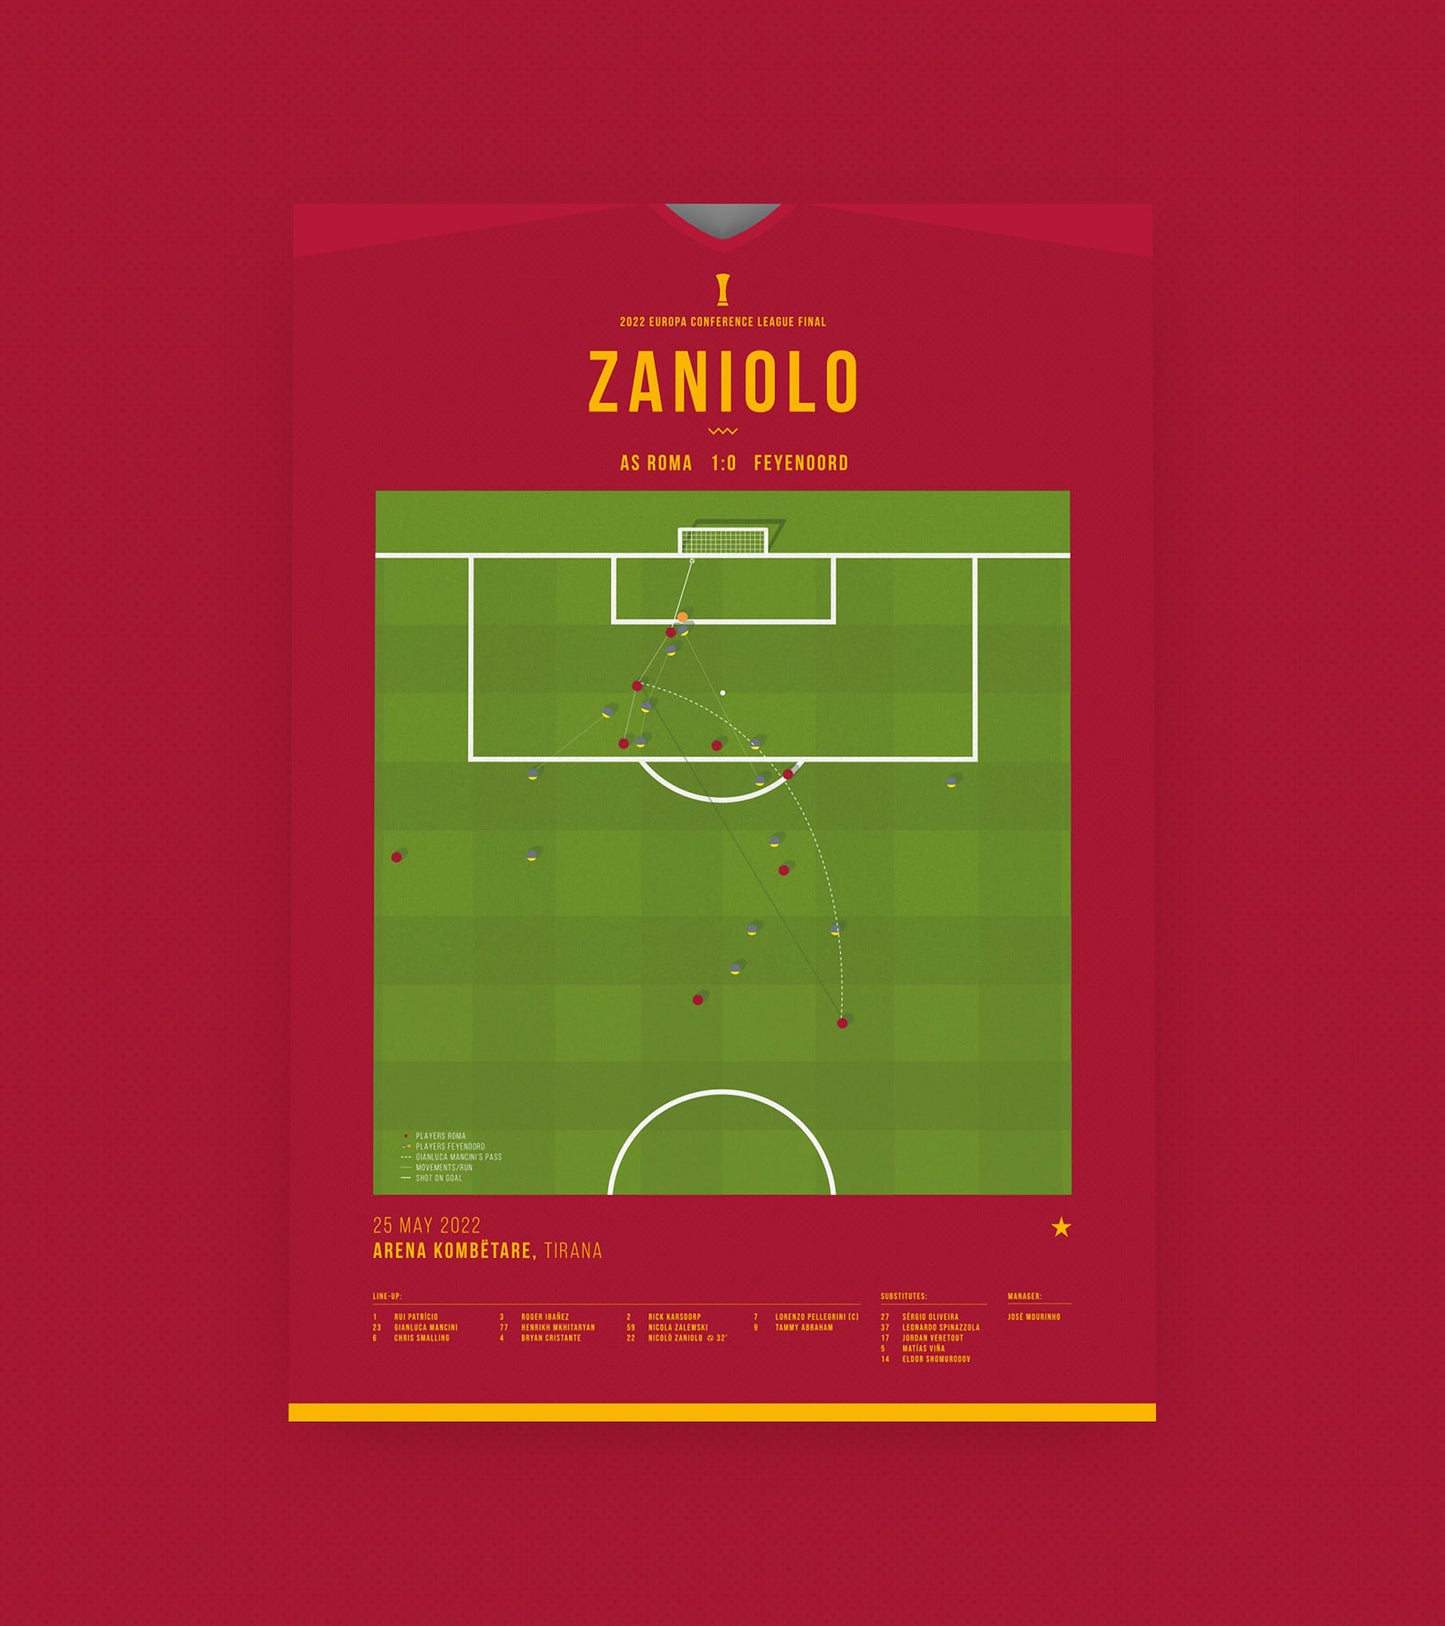 Zaniolo goal earns Roma first Conference League title